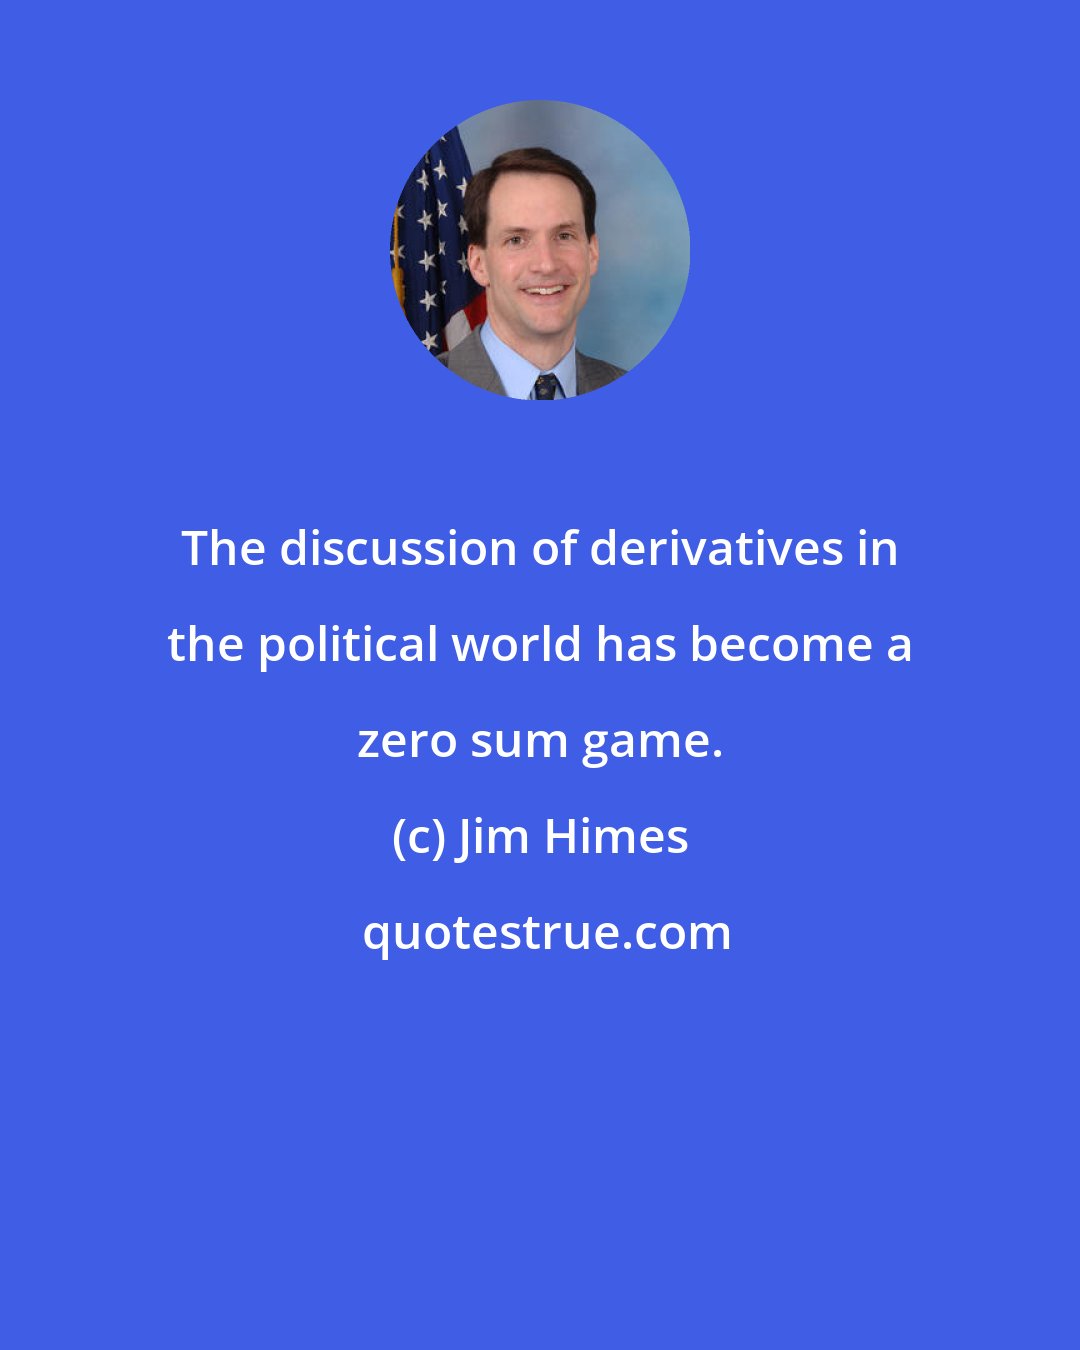 Jim Himes: The discussion of derivatives in the political world has become a zero sum game.